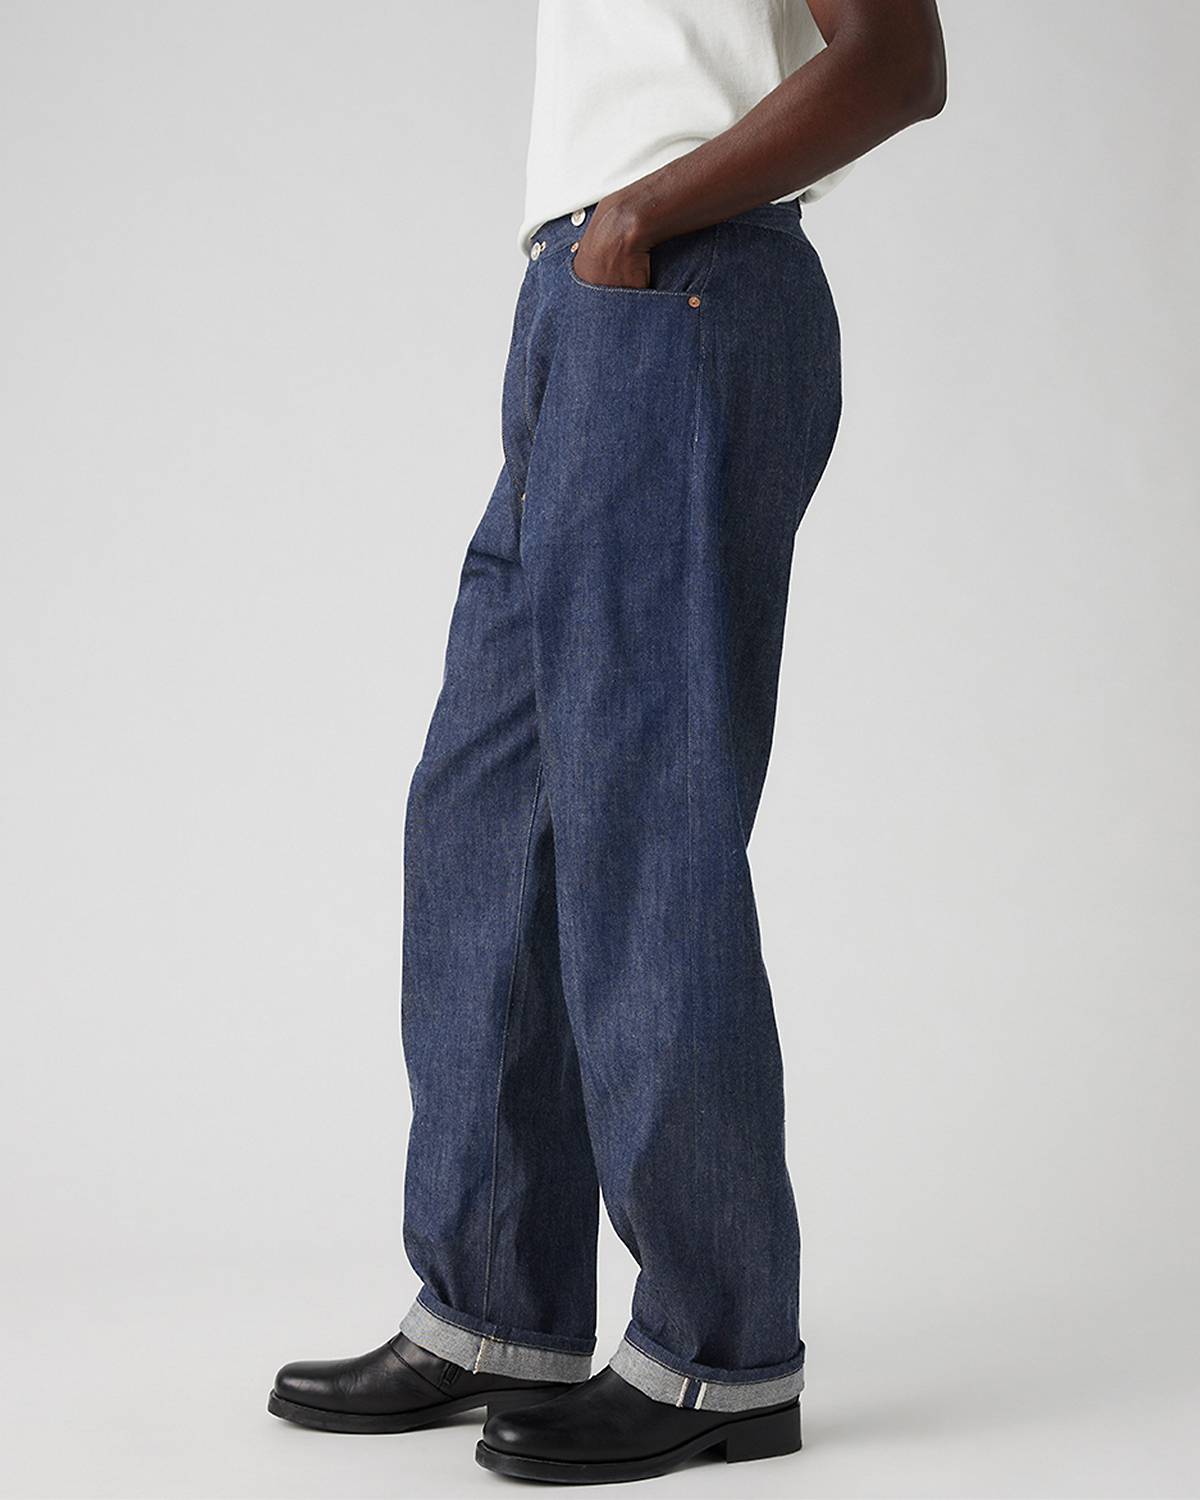 Image of Levi's Vintage Collection Jeans